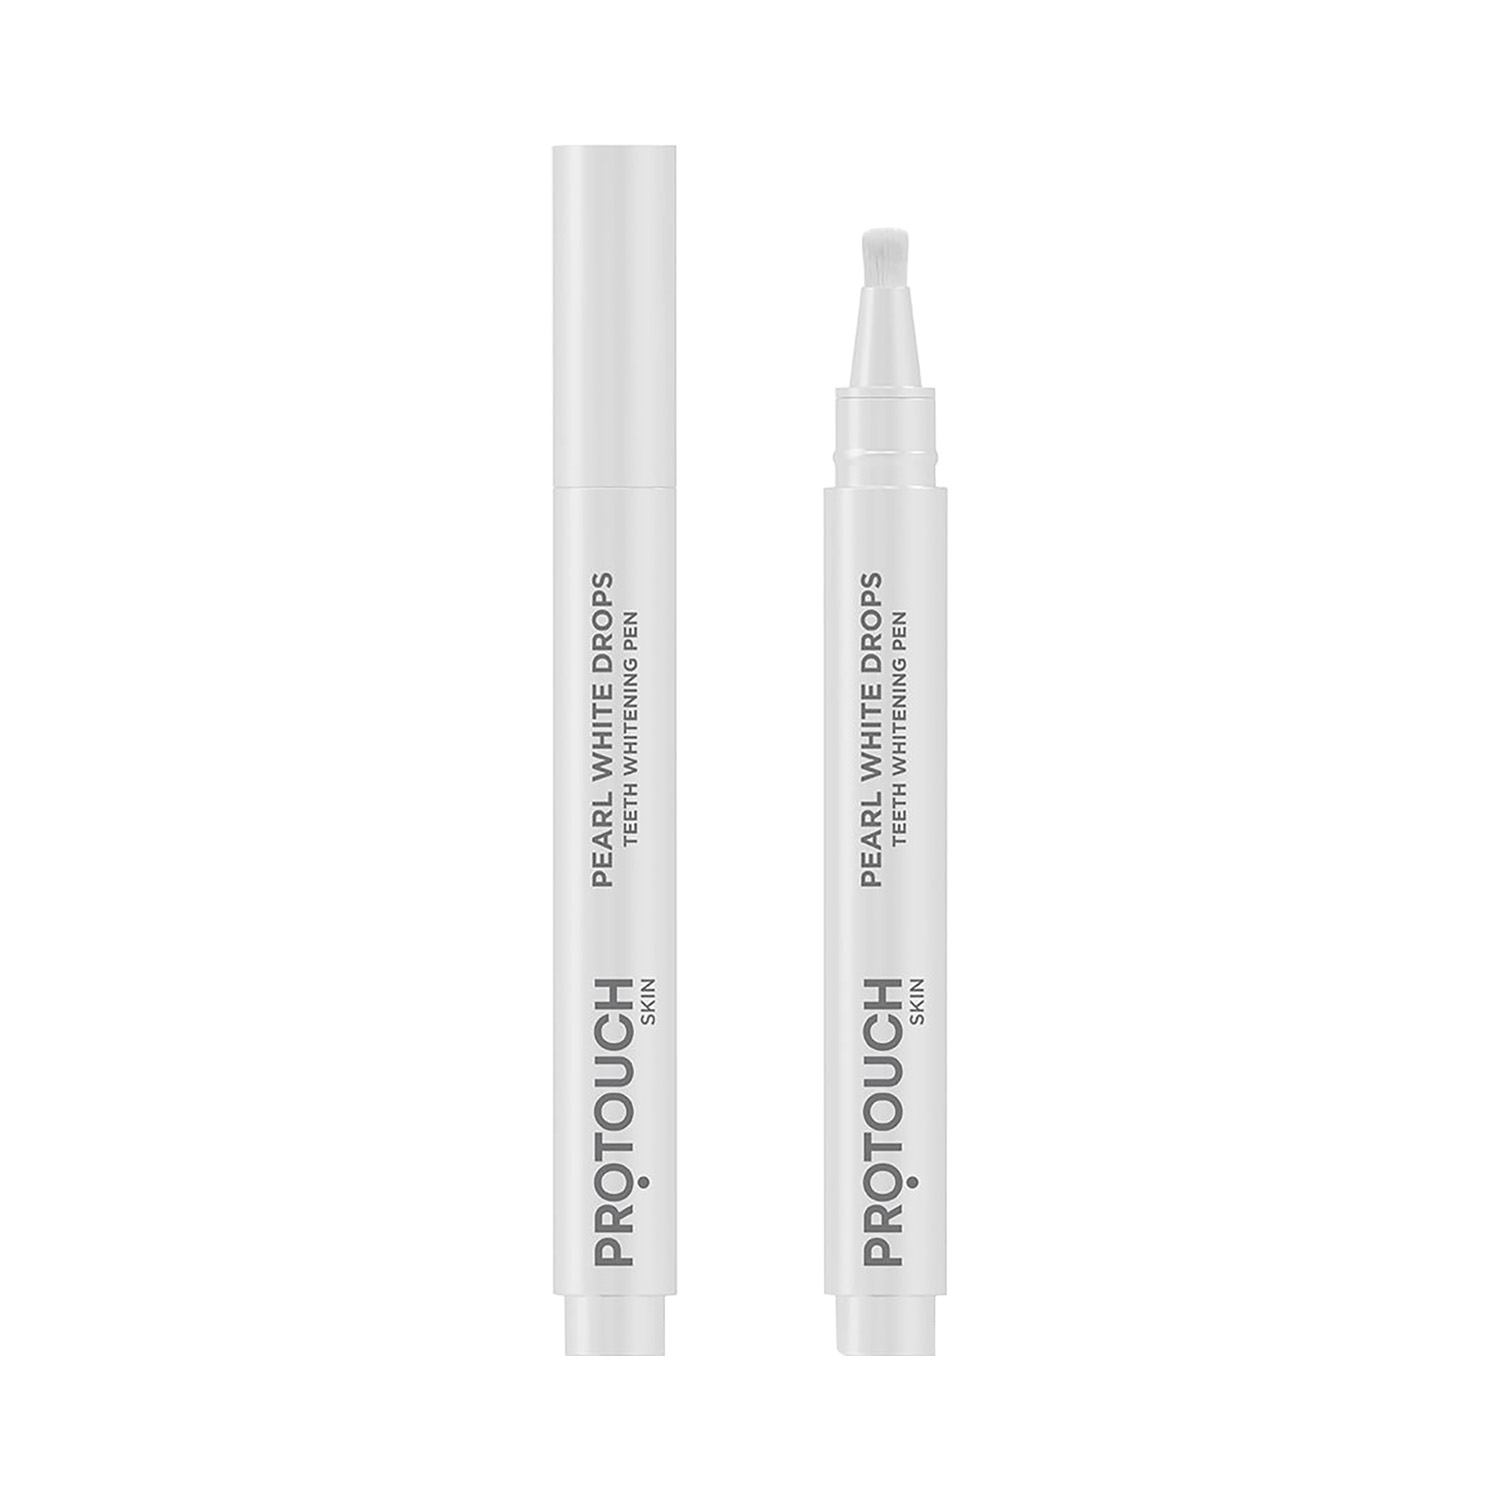 Protouch | Protouch Pearl White Drops- Teeth Whitening Pen Gel, Whiter Teeth & Fresher Breath